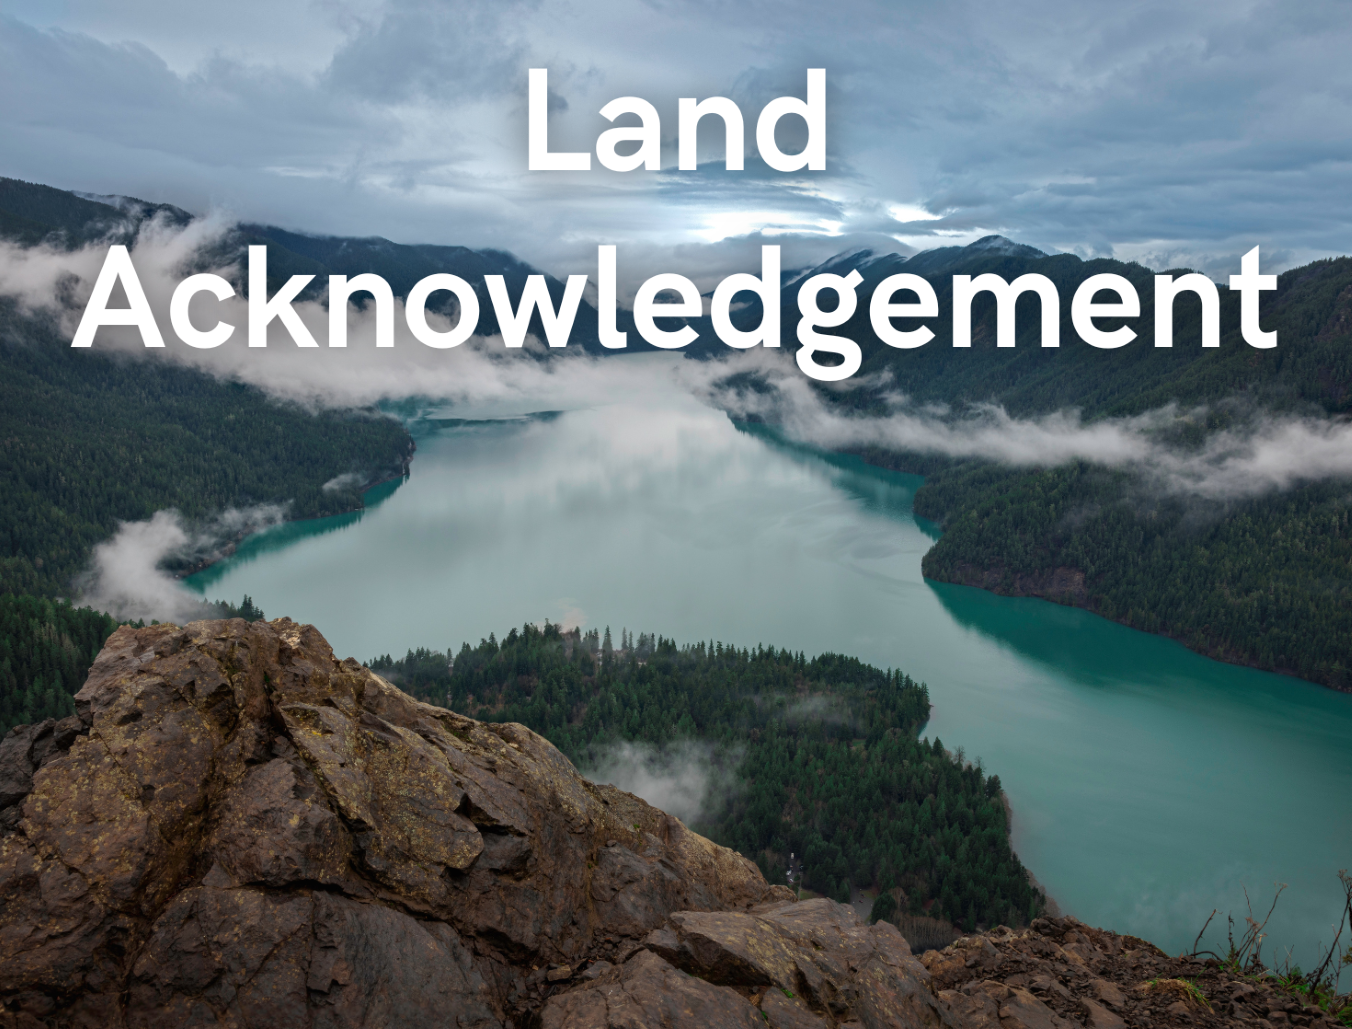 A view from atop a hill overlooking a cloudy lake surrounded by forest and hills with the caption "Land Acknowledgement"